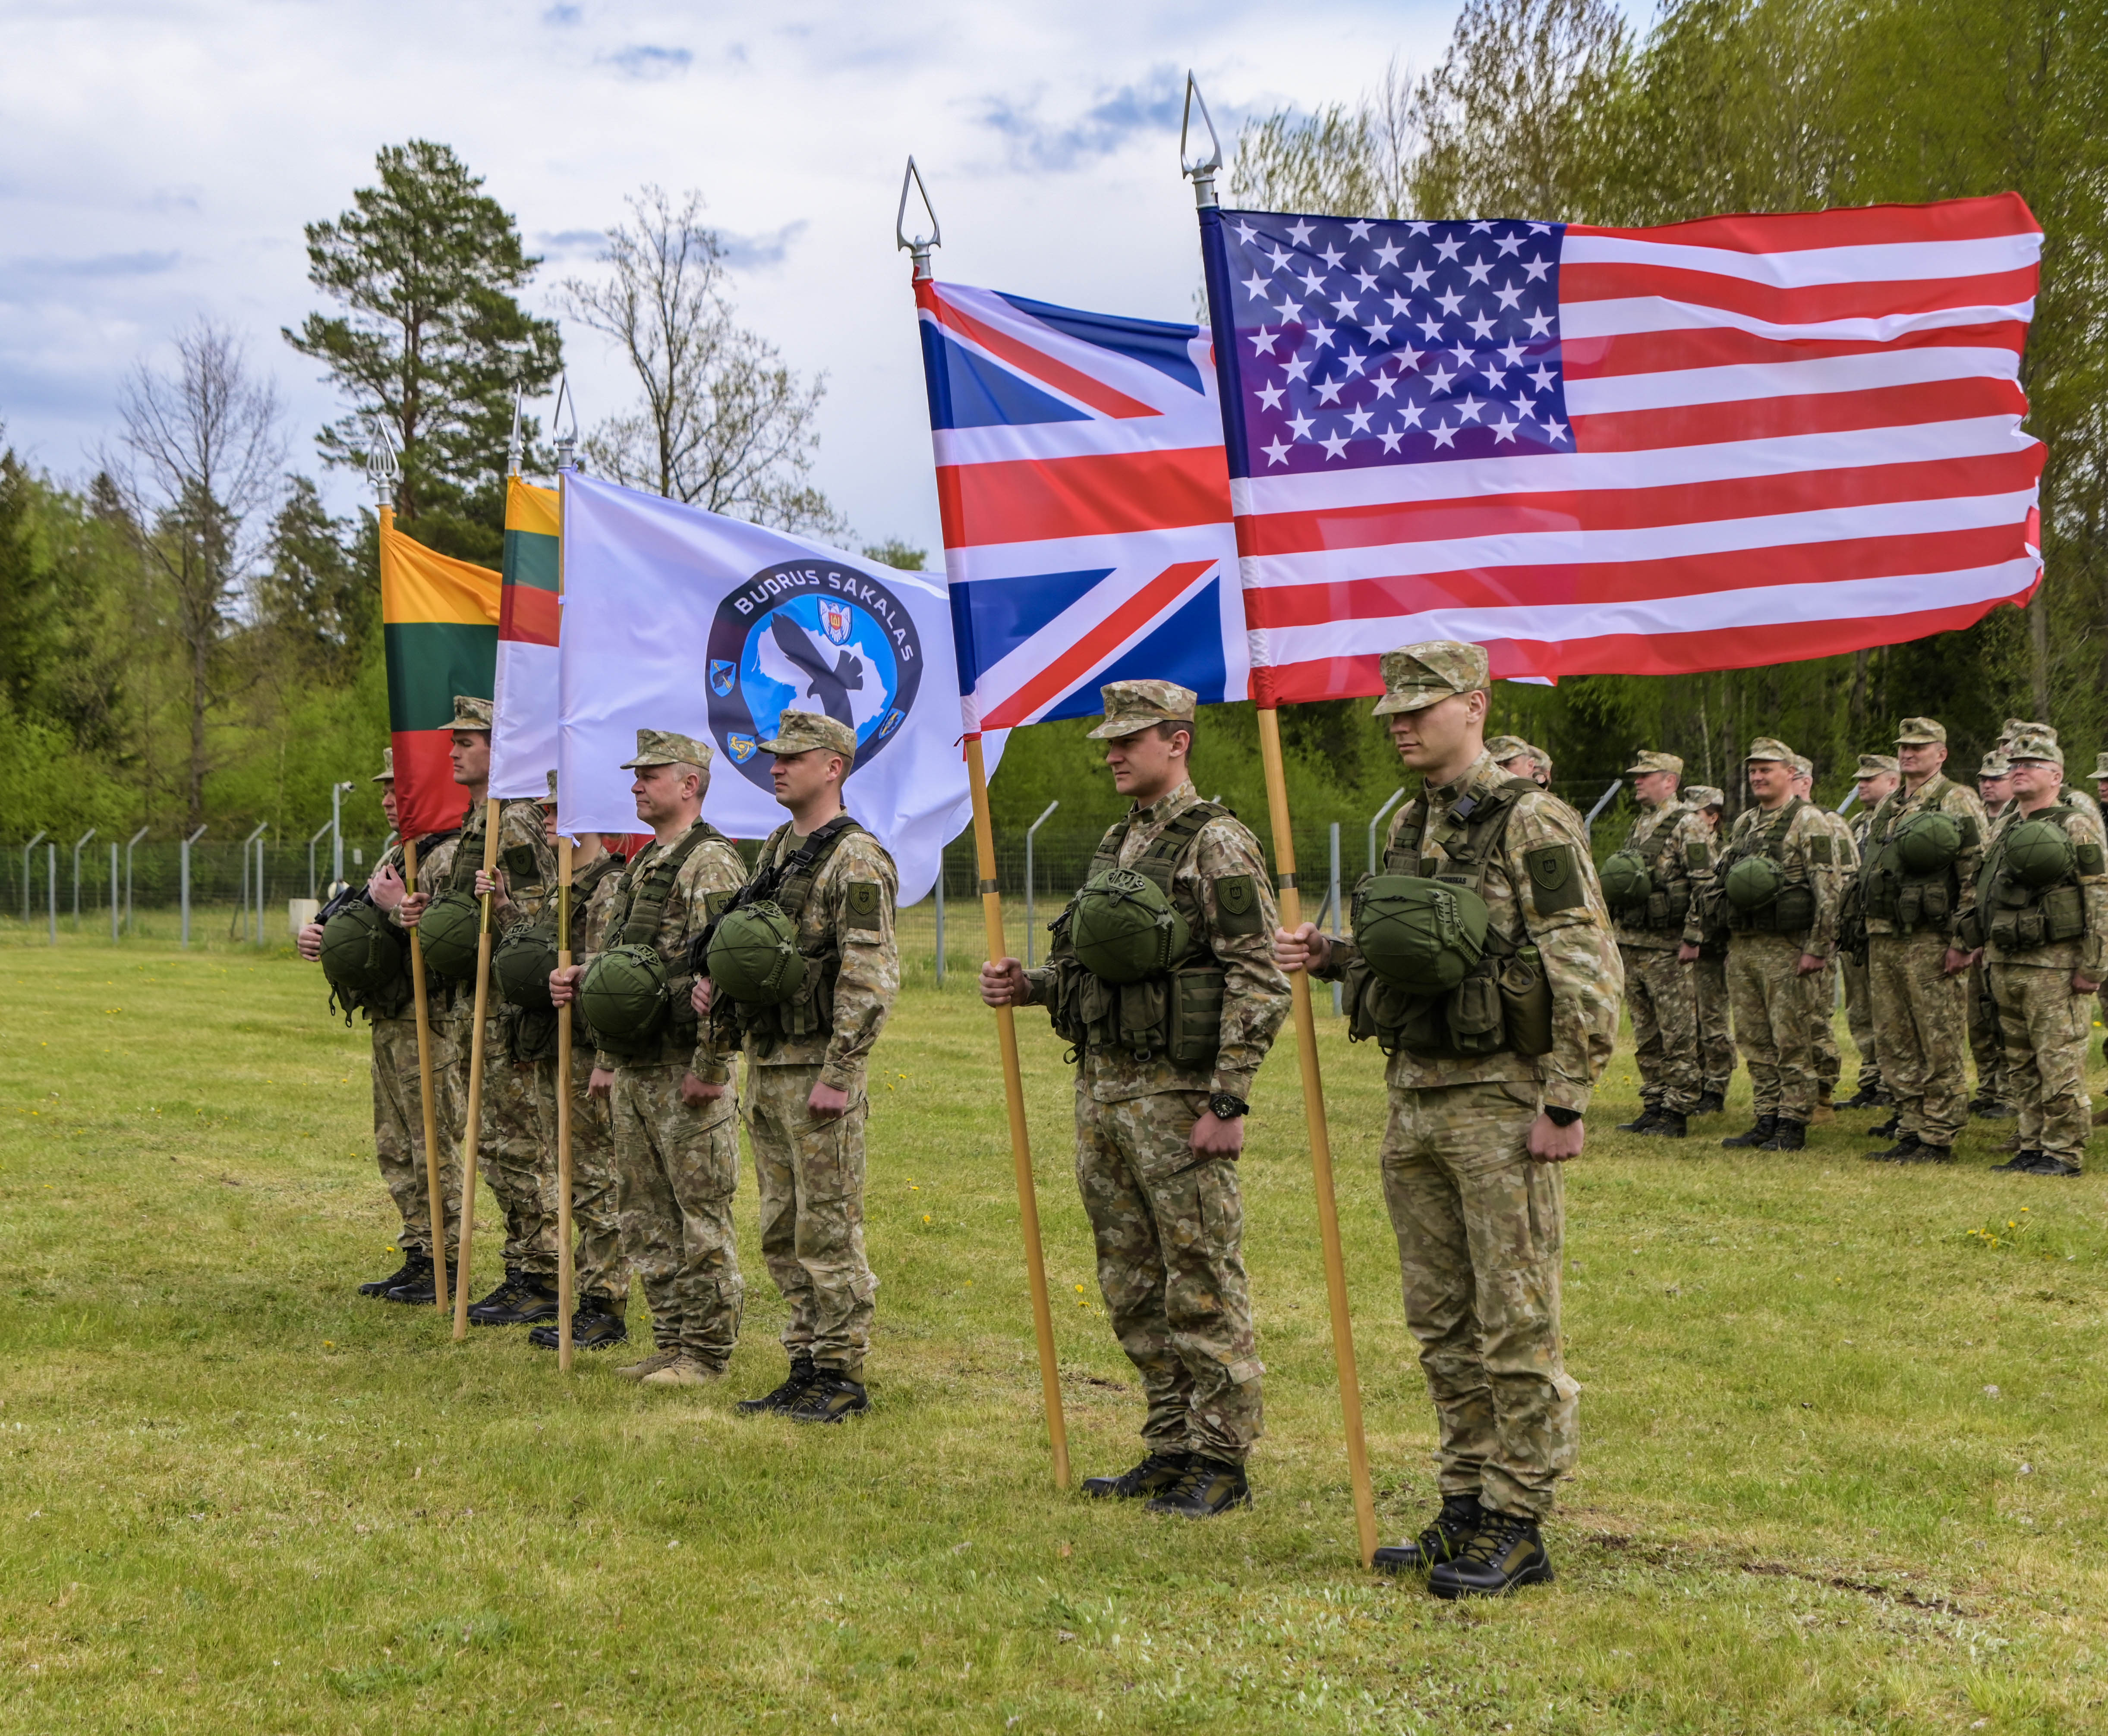 Personnel stand with country flags.